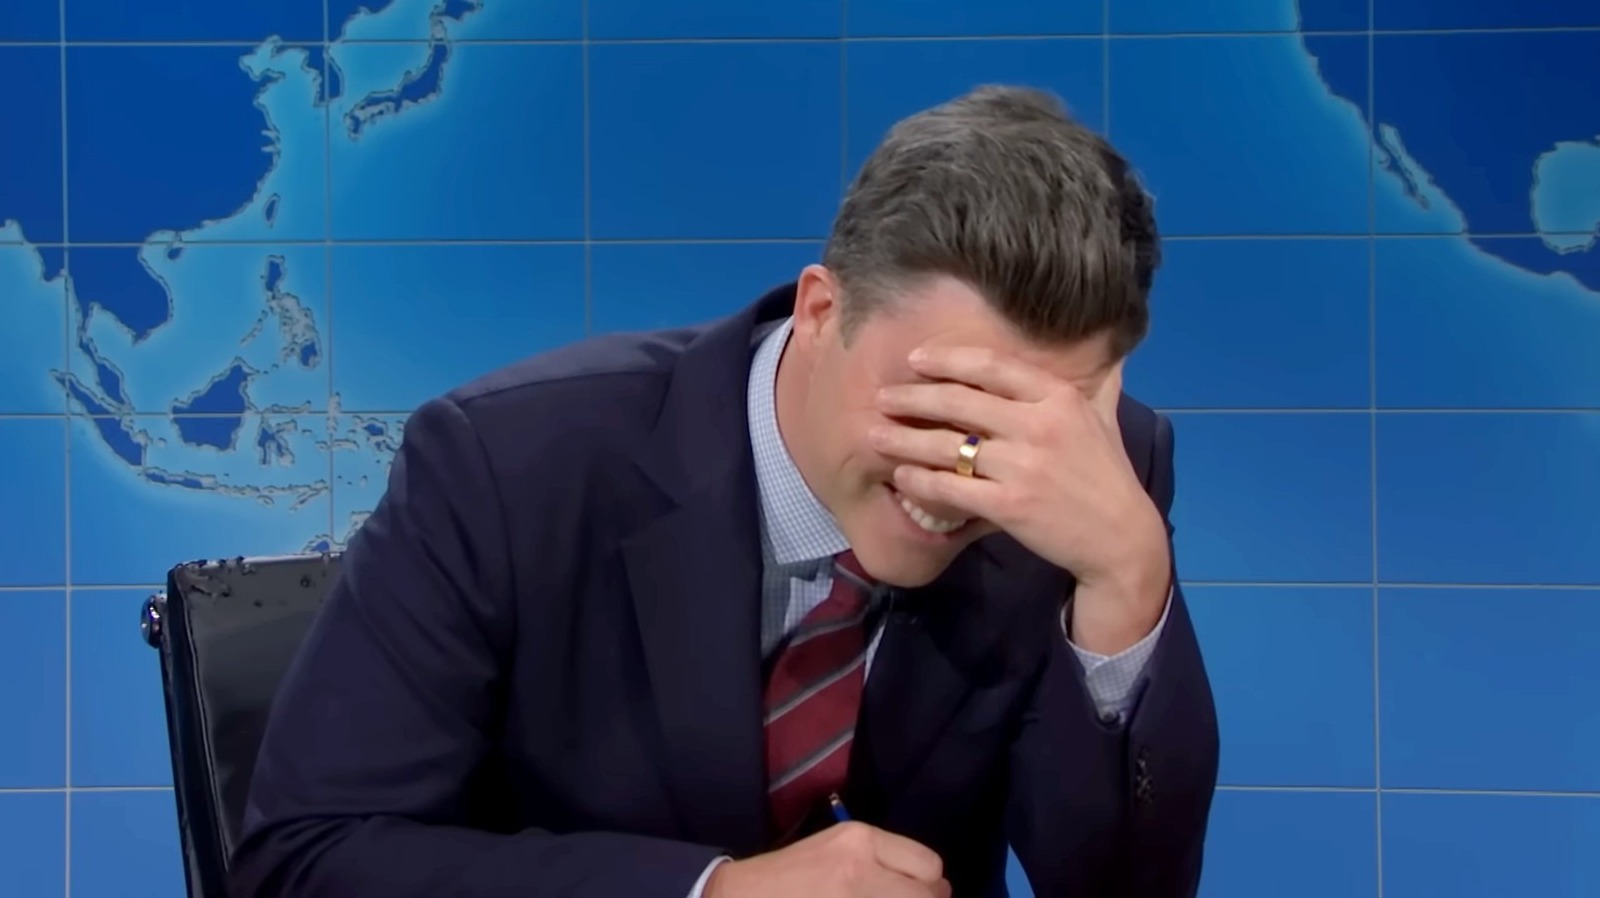 Michael Che Plays A Truly Evil Prank on Colin Jost In SNL's April Fool